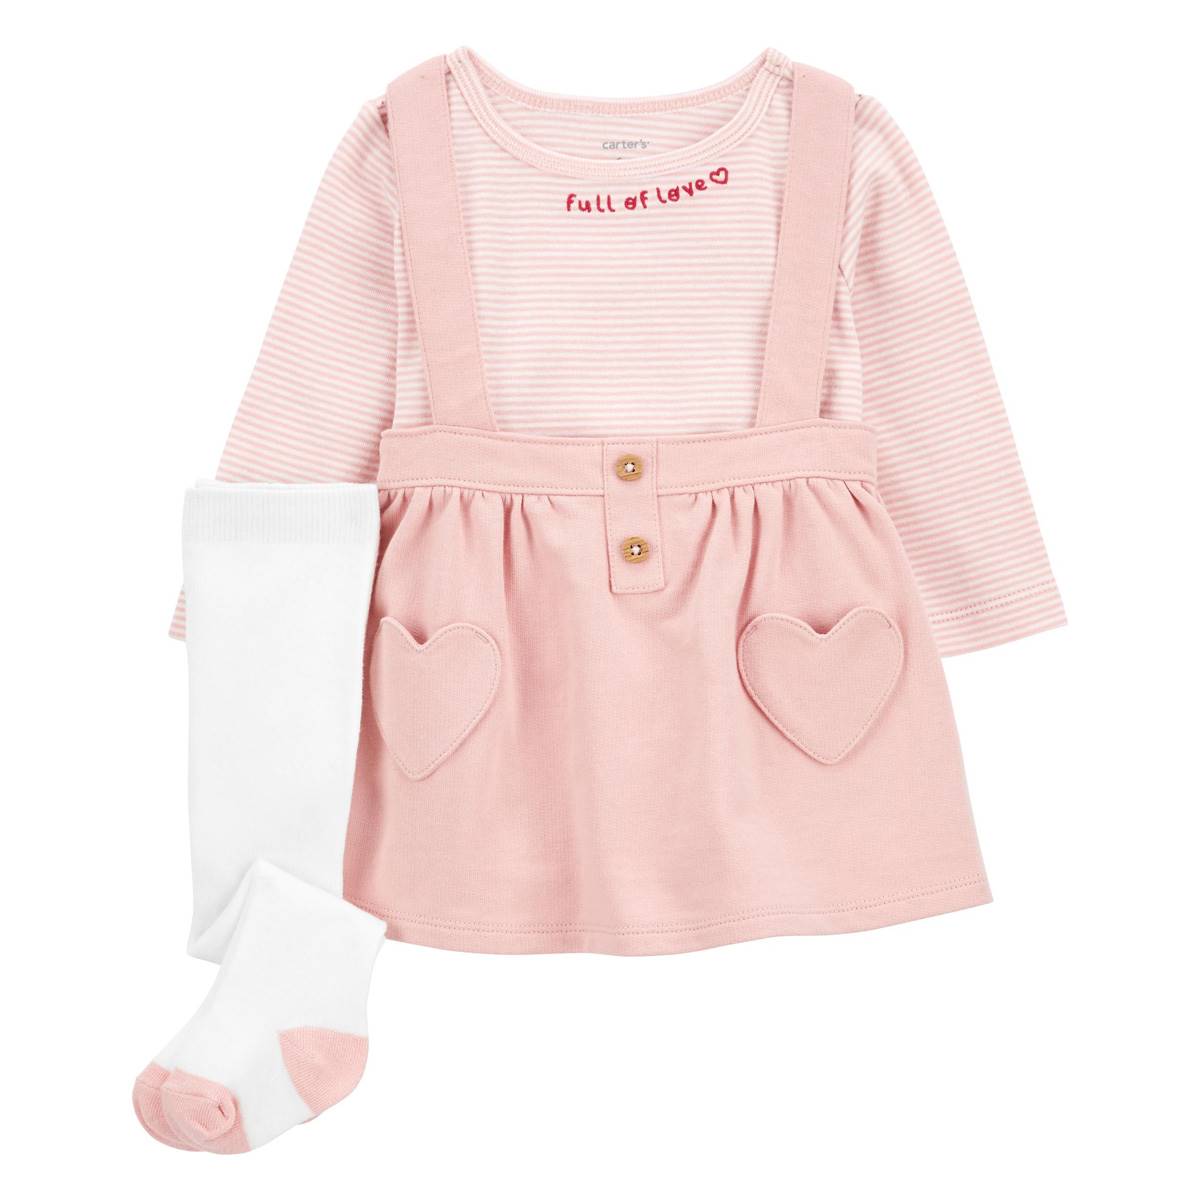 Baby Girl (3-24M) Carter's(R) Full Of Love Jumper Set W/Tights